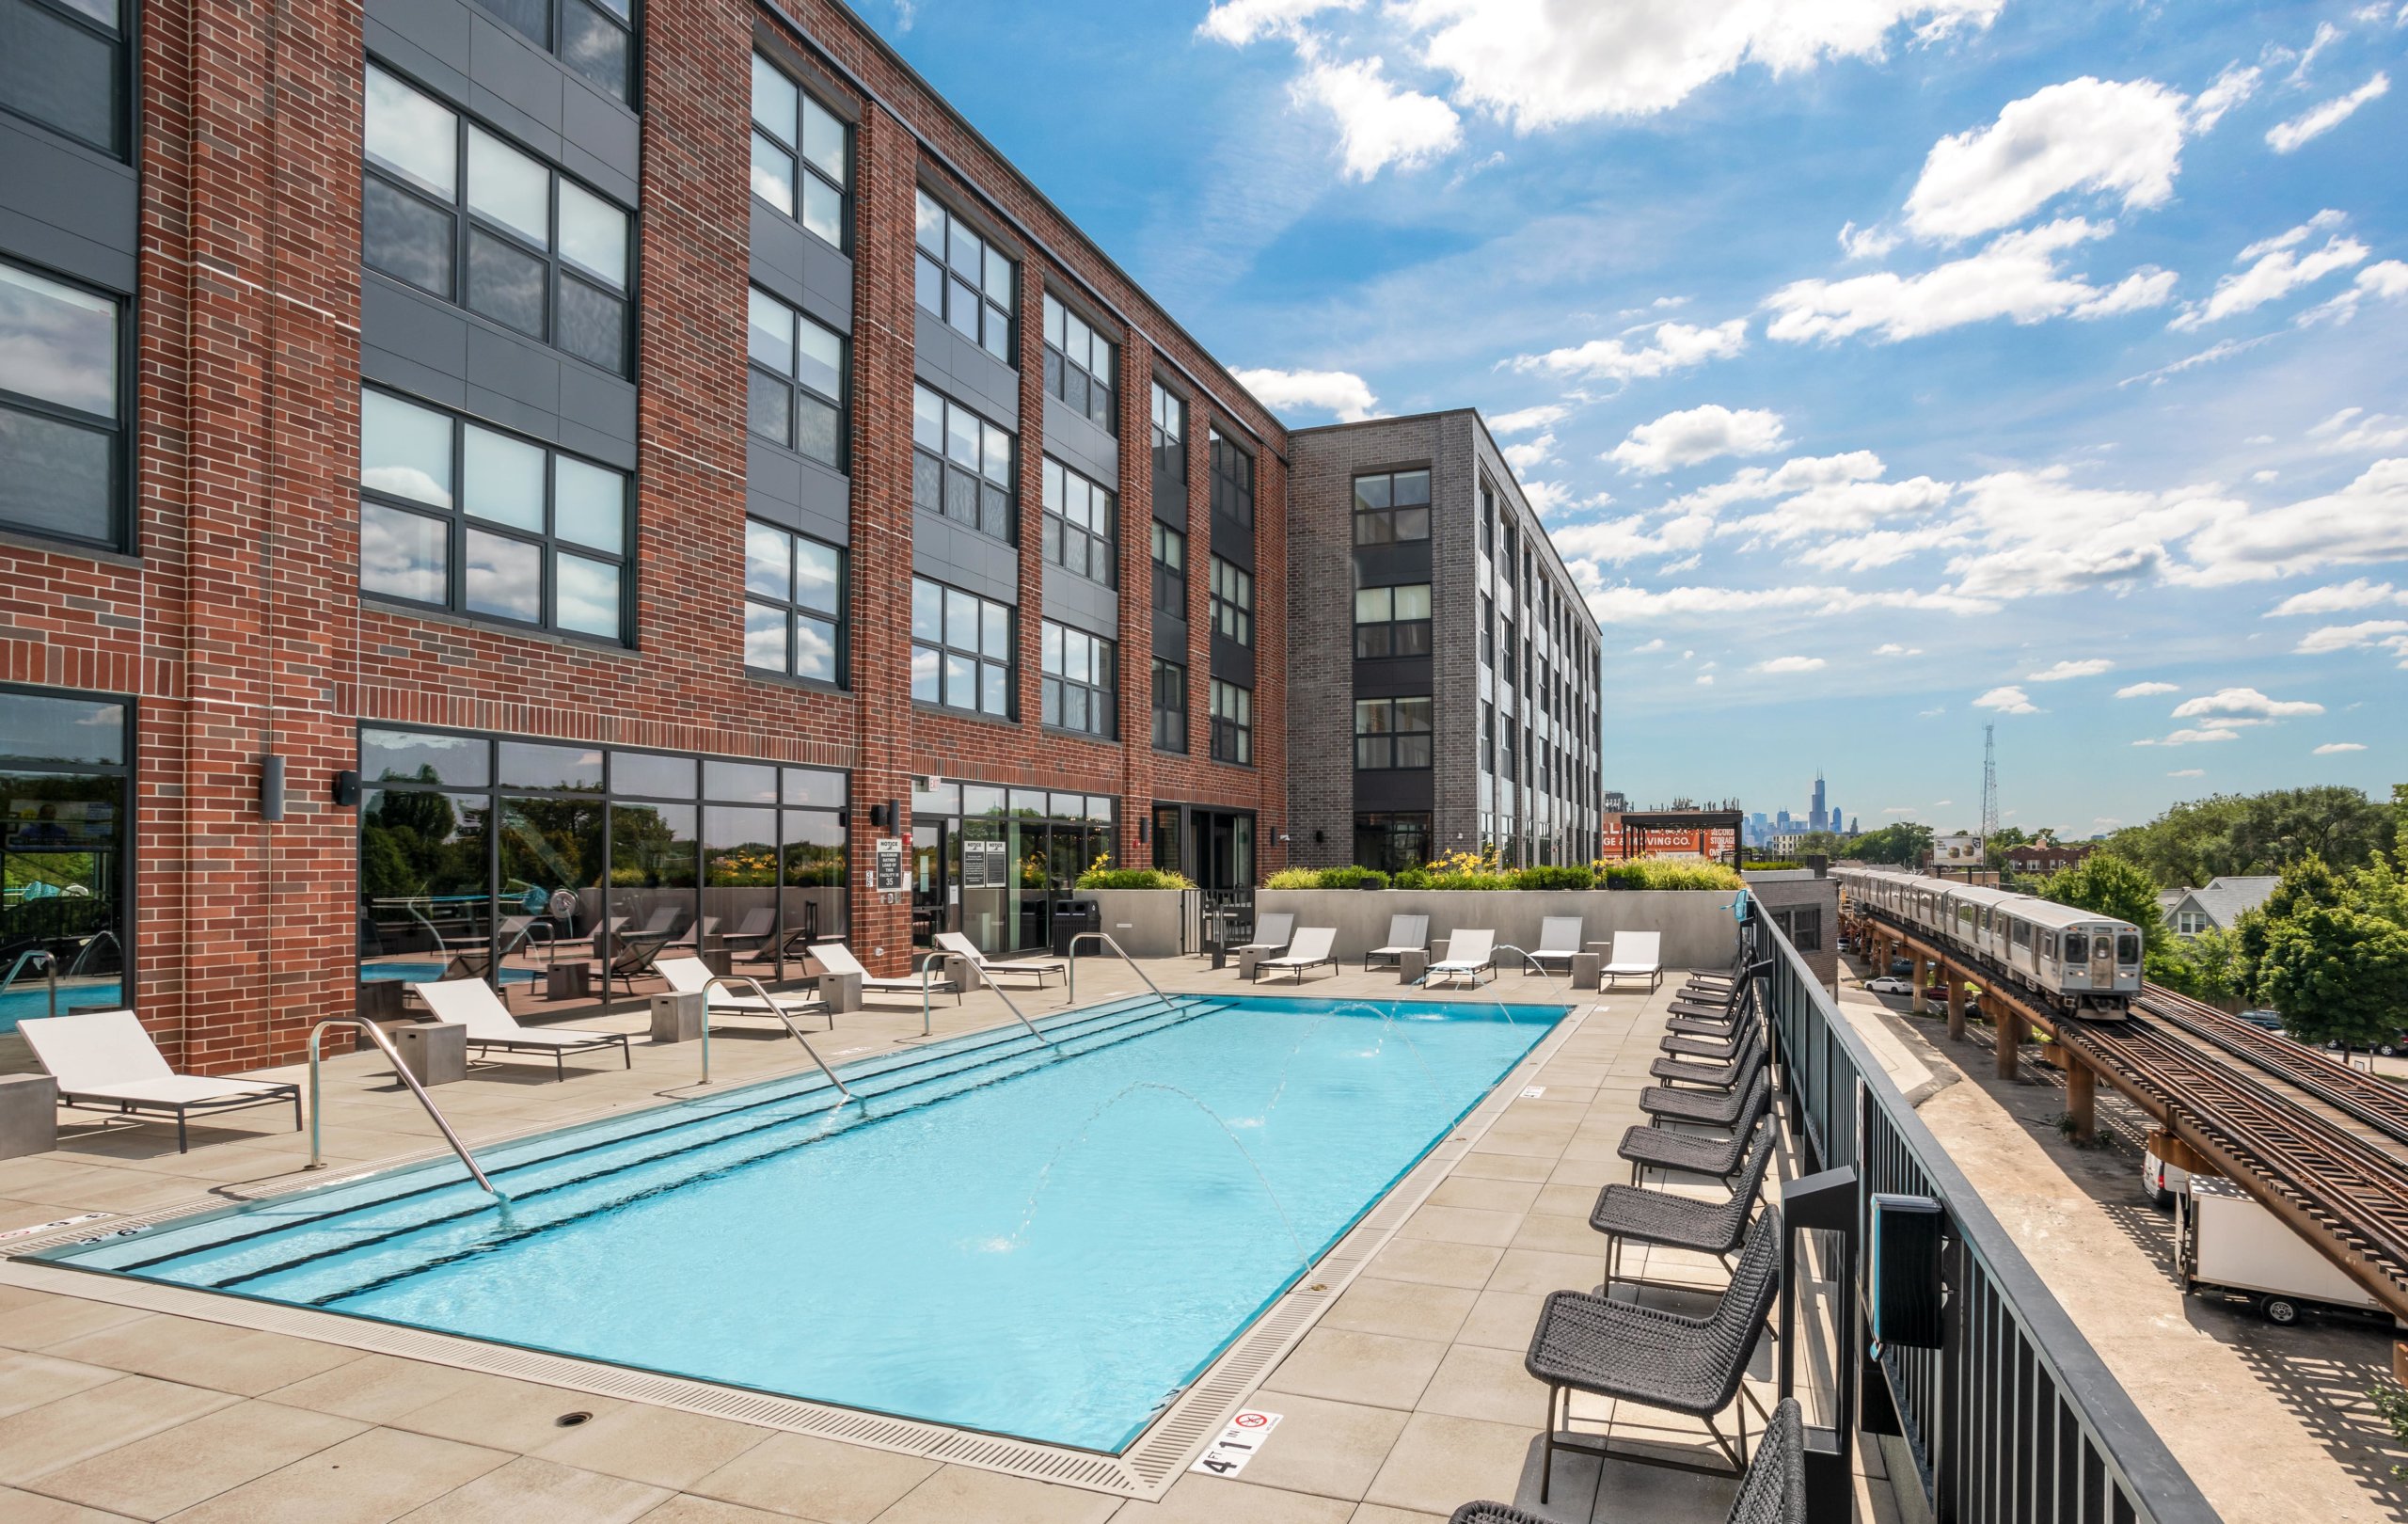 Logan Square Apartments pool deck with lounge chairs and benches